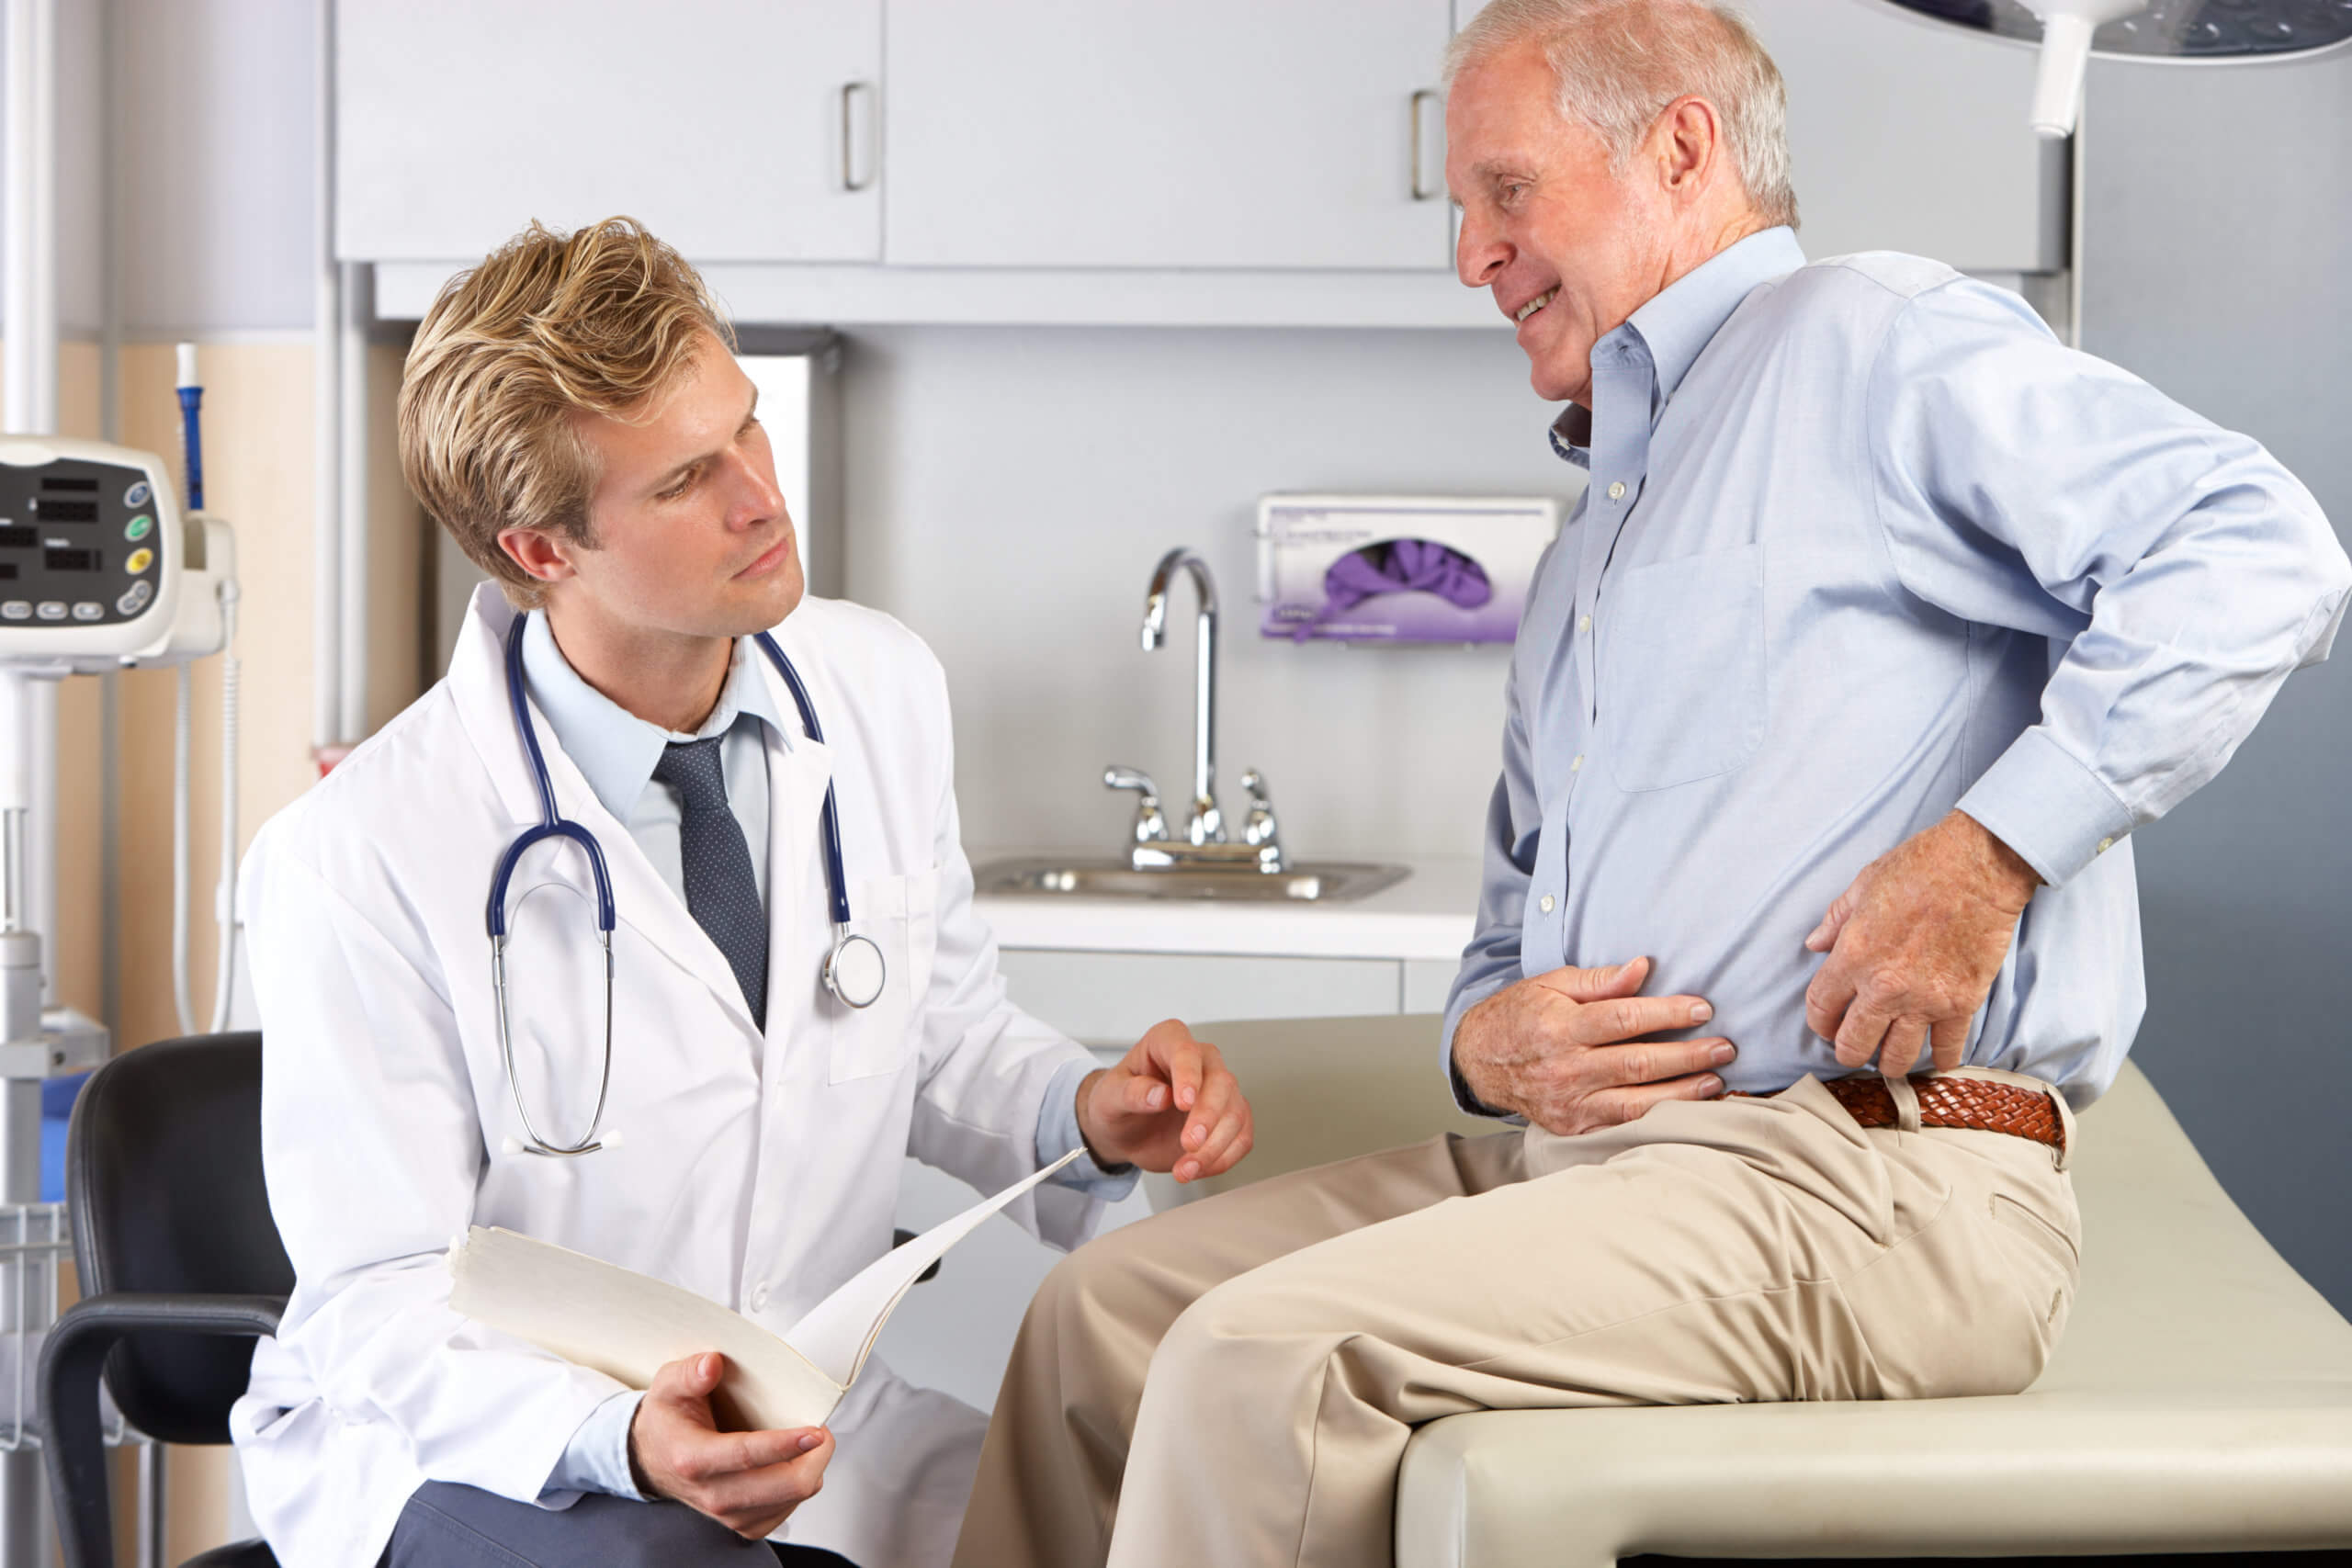 An elderly man shows a doctor where his hip pain is located.